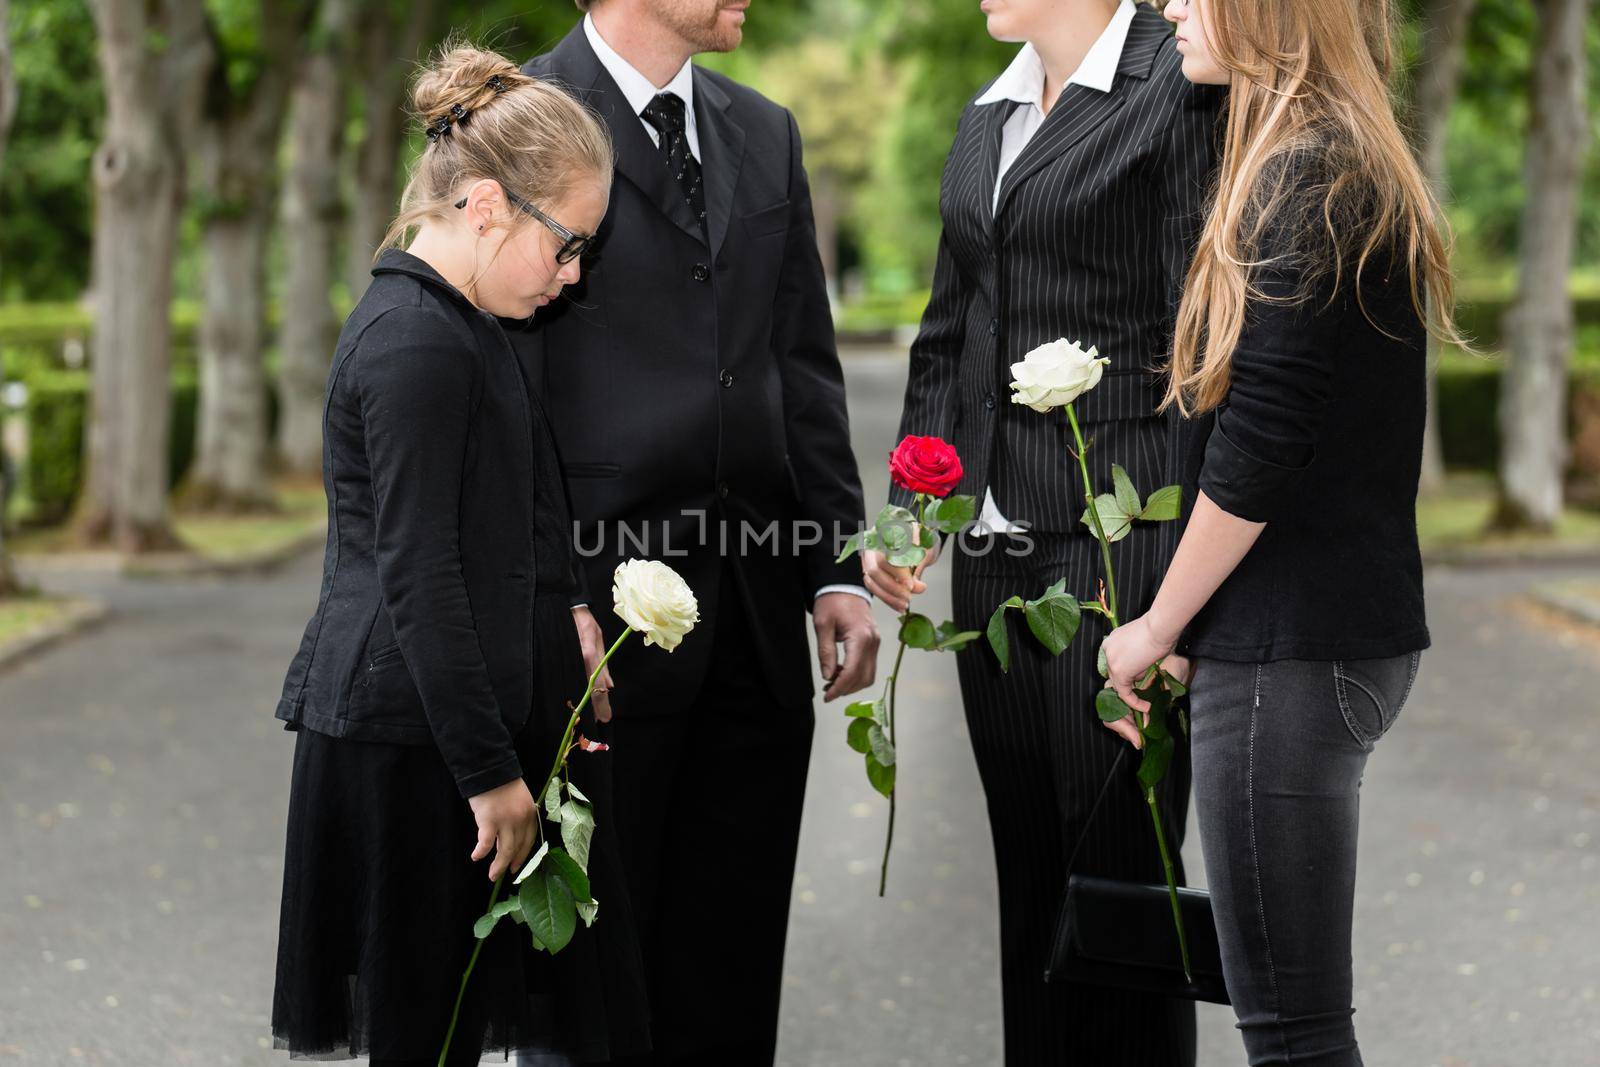 Family mourning on funeral at cemetery by Kzenon